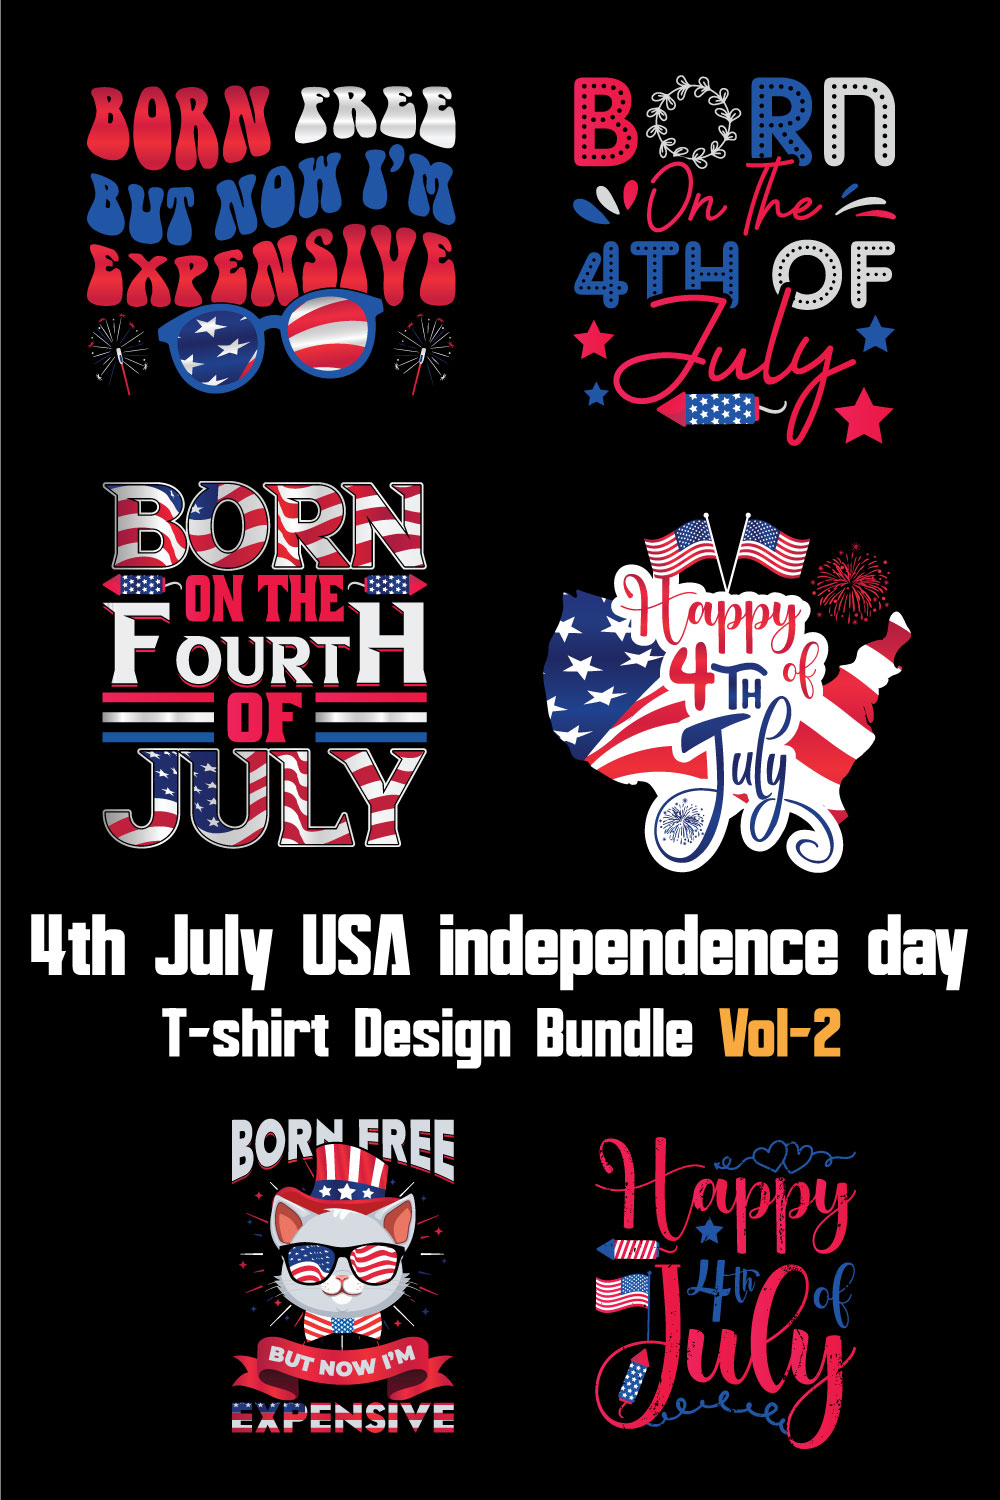 4th July USA independence day T-shirt Design Bundle Vol-2 pinterest preview image.